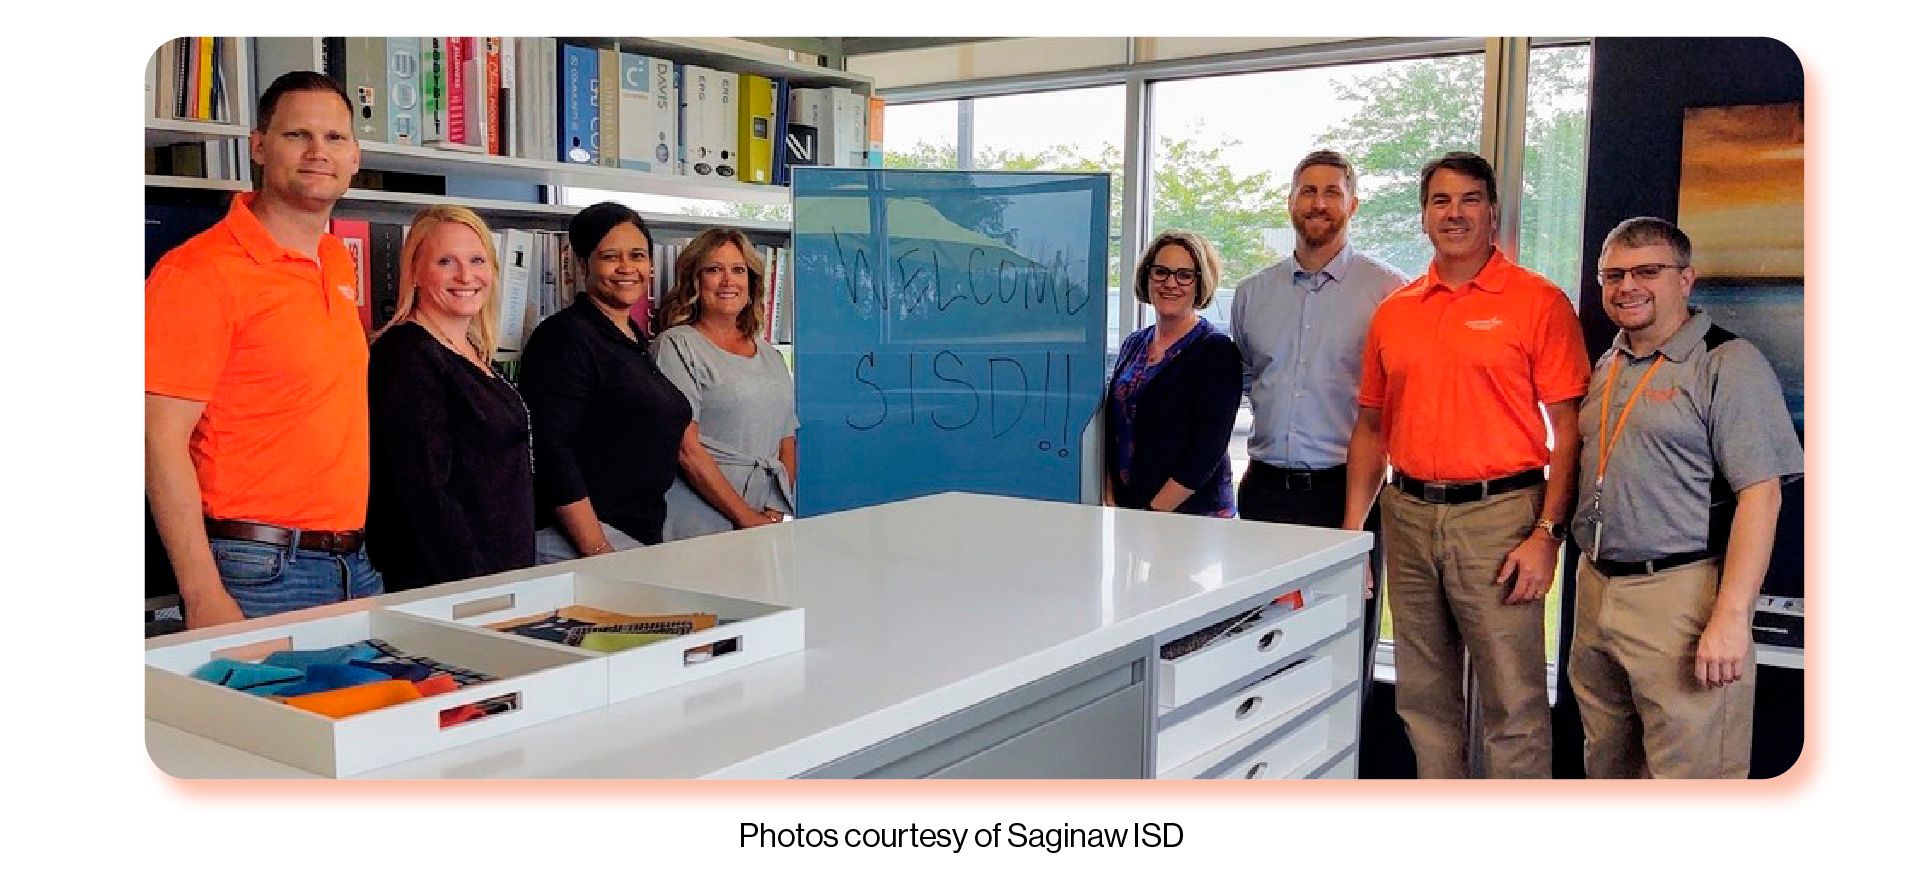 Image: A group photo of Dr. Collier and his team at Saginaw ISD.